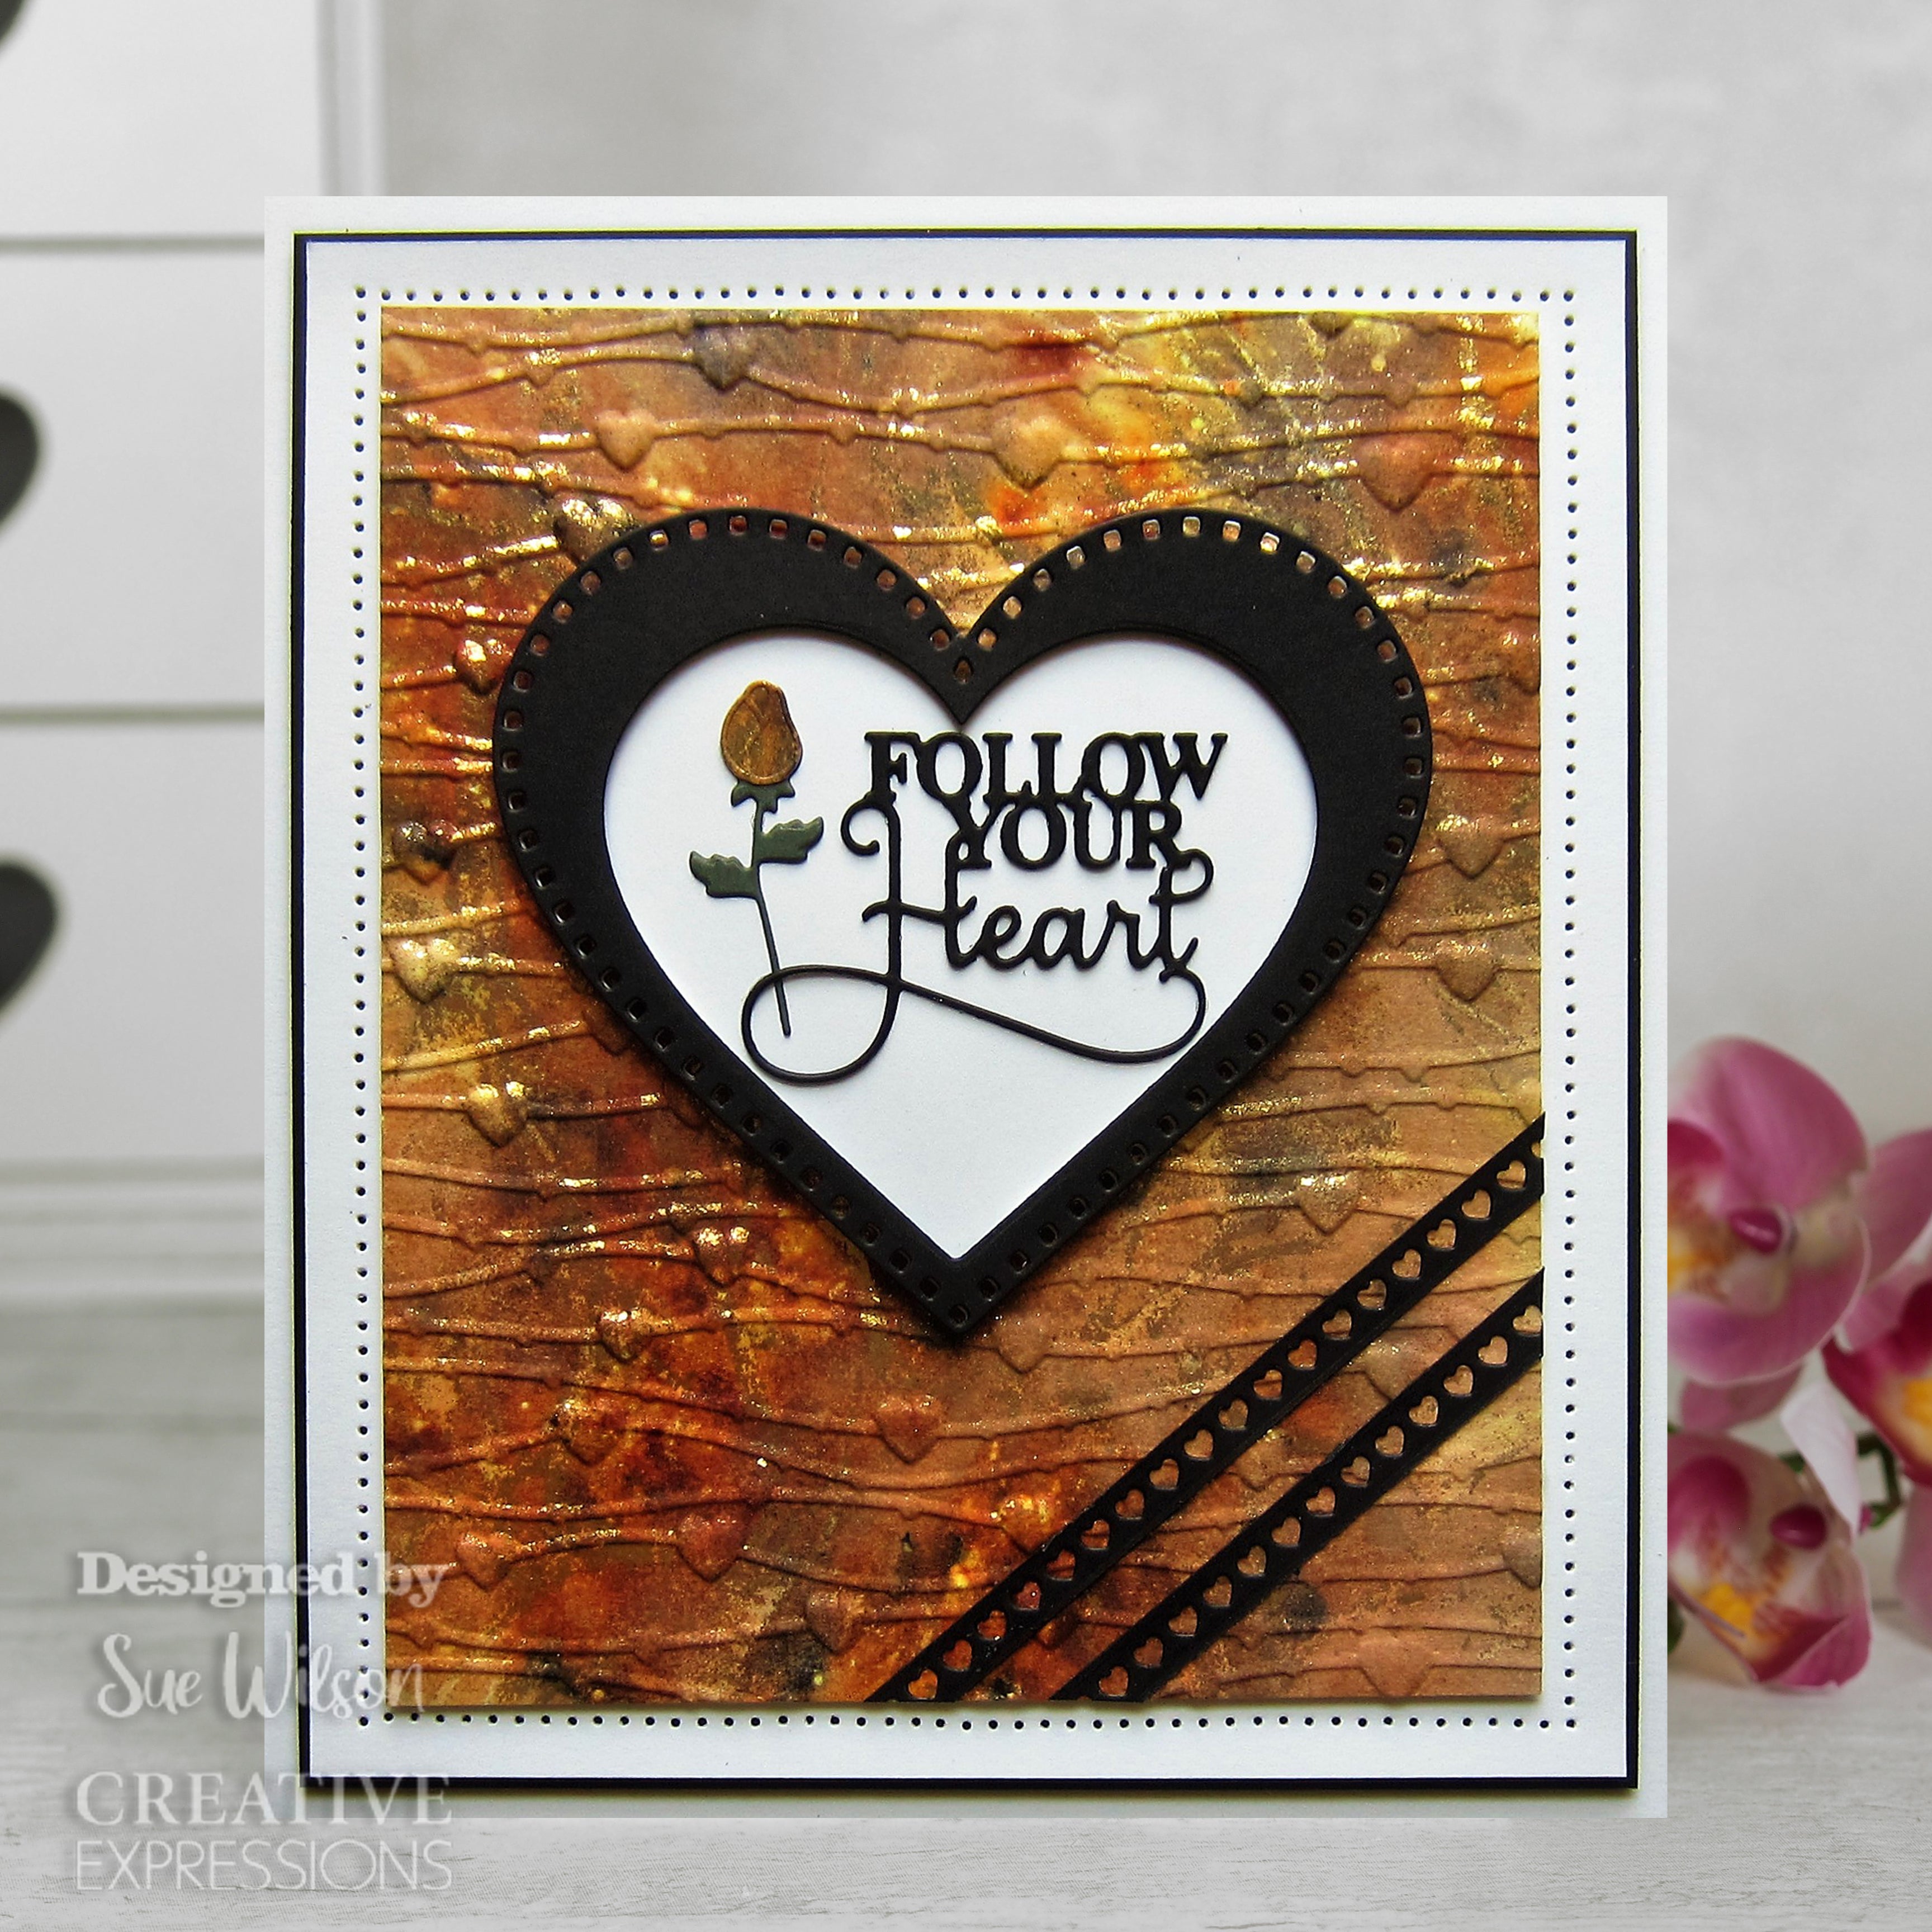 Creative Expressions Sue Wilson Mini Expressions Follow Your Heart Craft Die